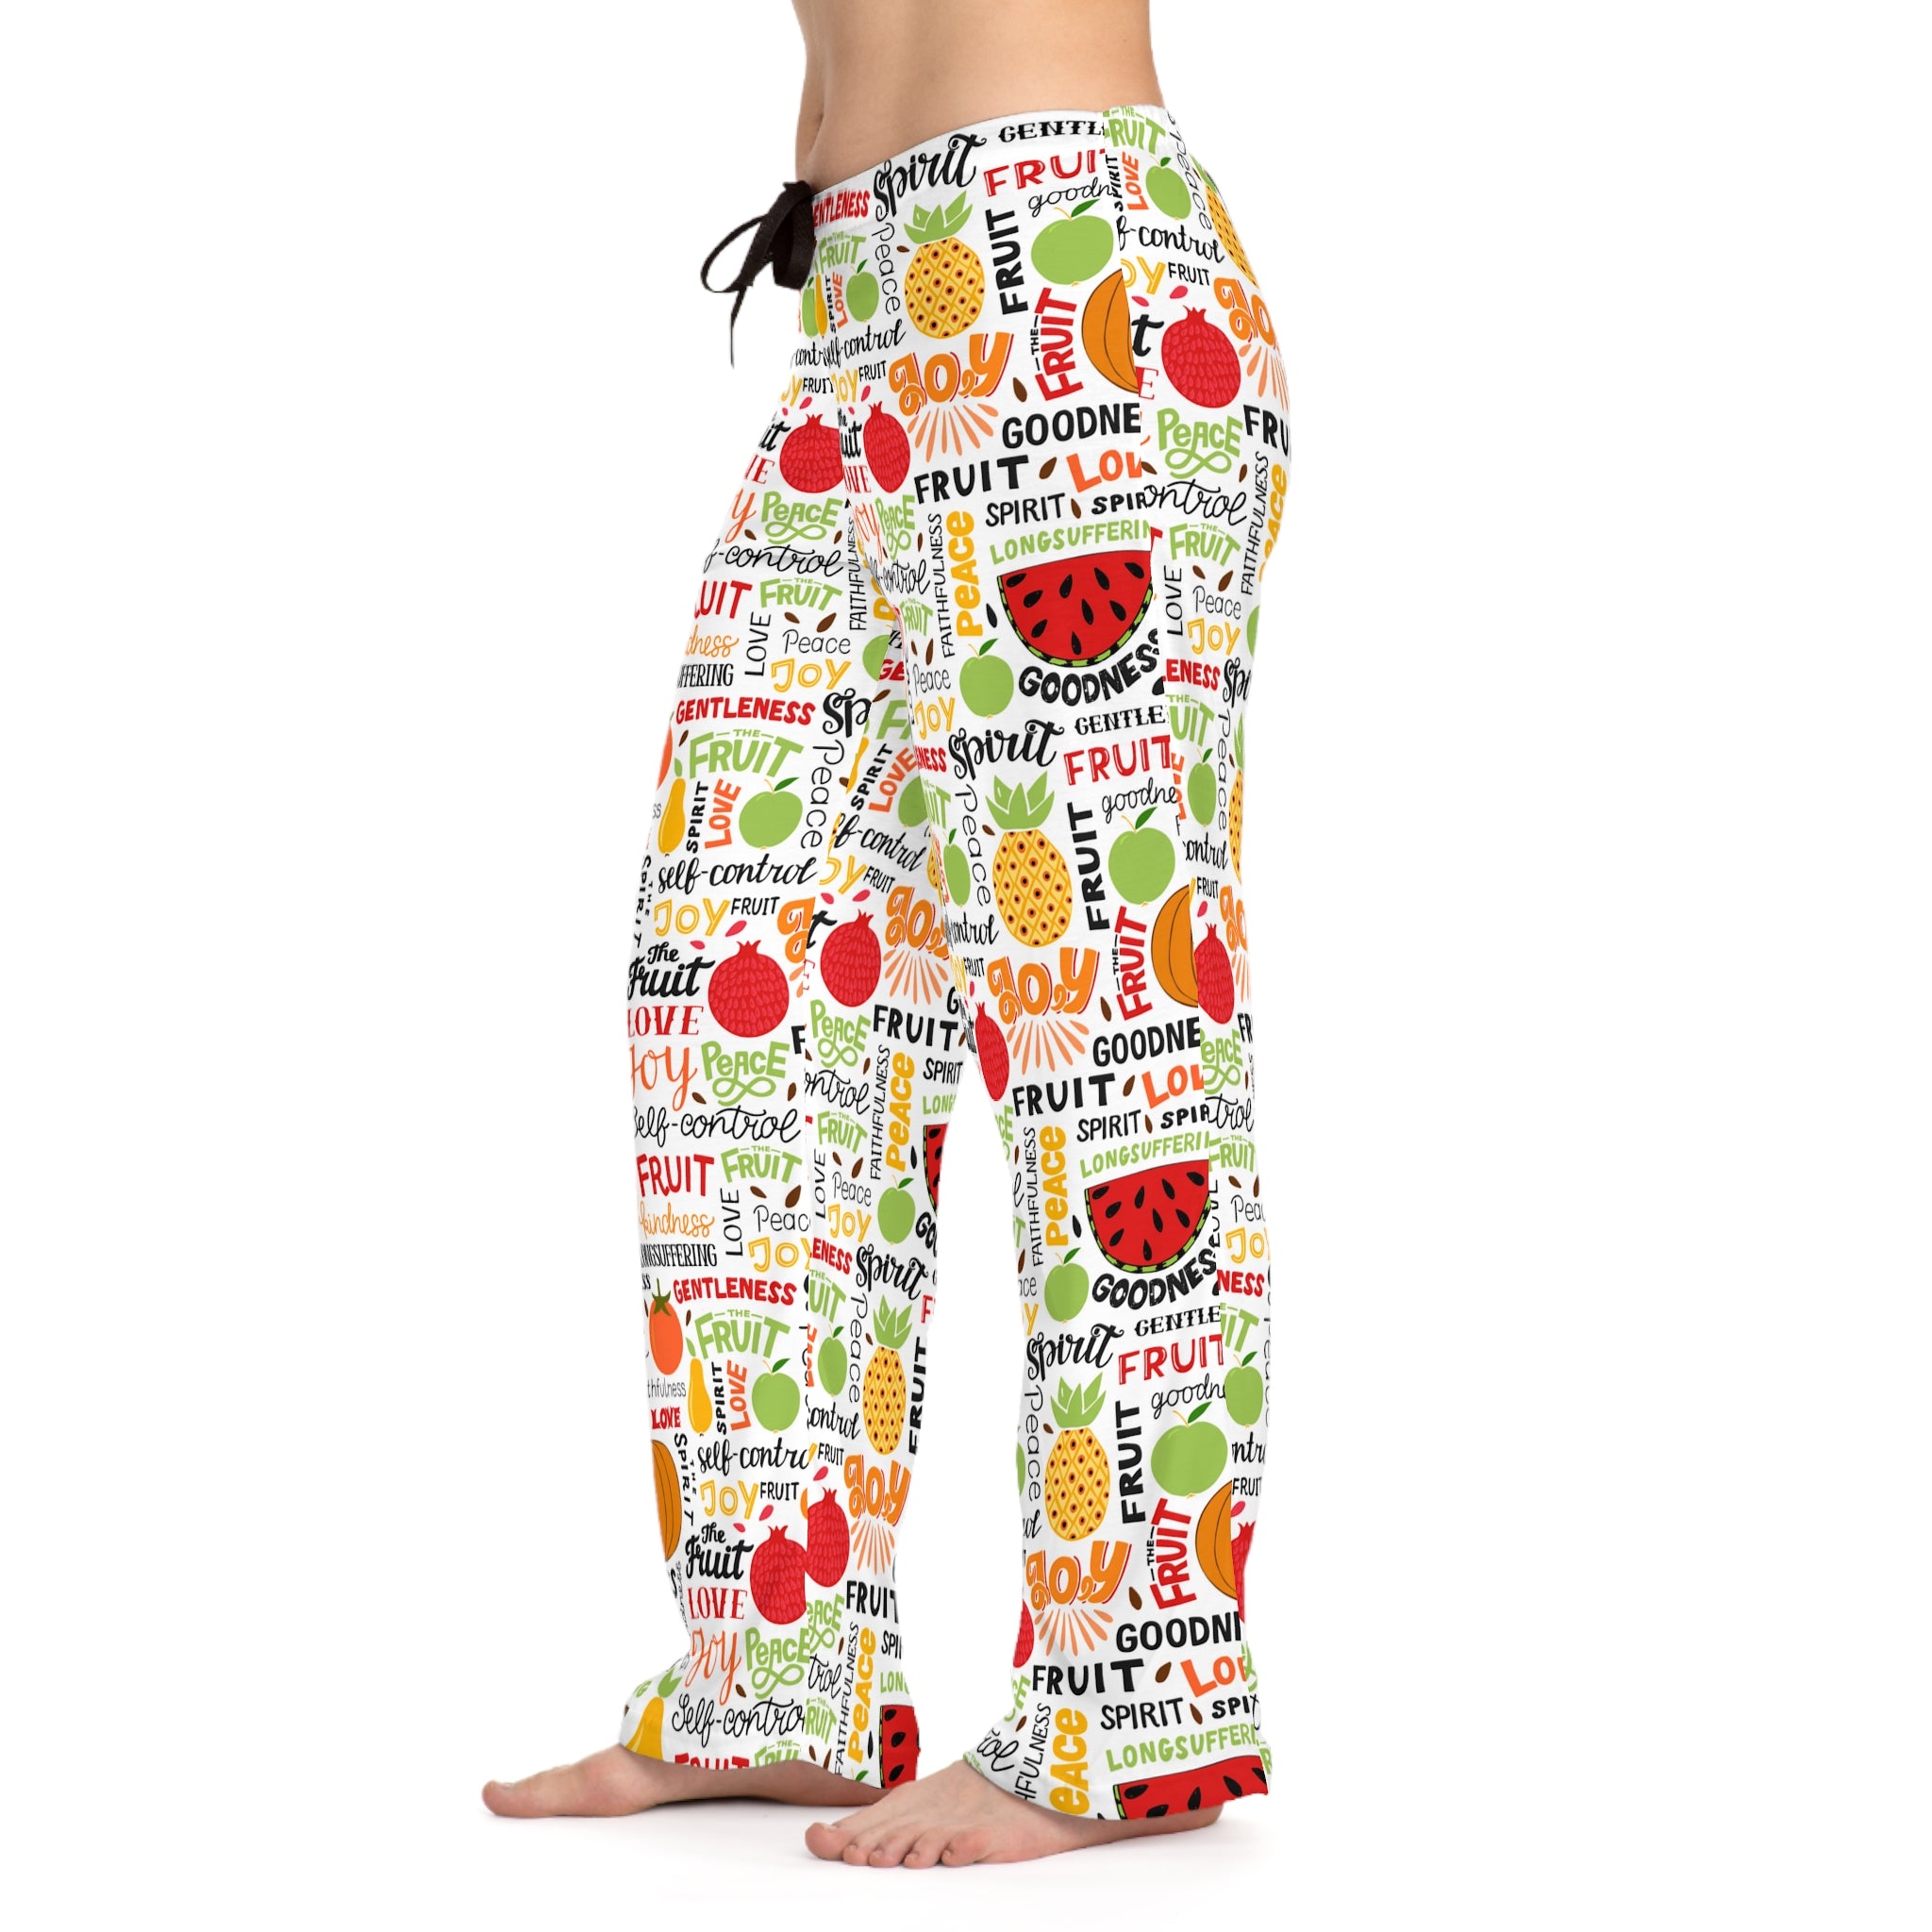 Fruit of the Spirit Women's Lounge / Pajama Pants - Matching Pajama Set and Indoor Slippers Available Size: XS Color: White stitching Jesus Passion Apparel